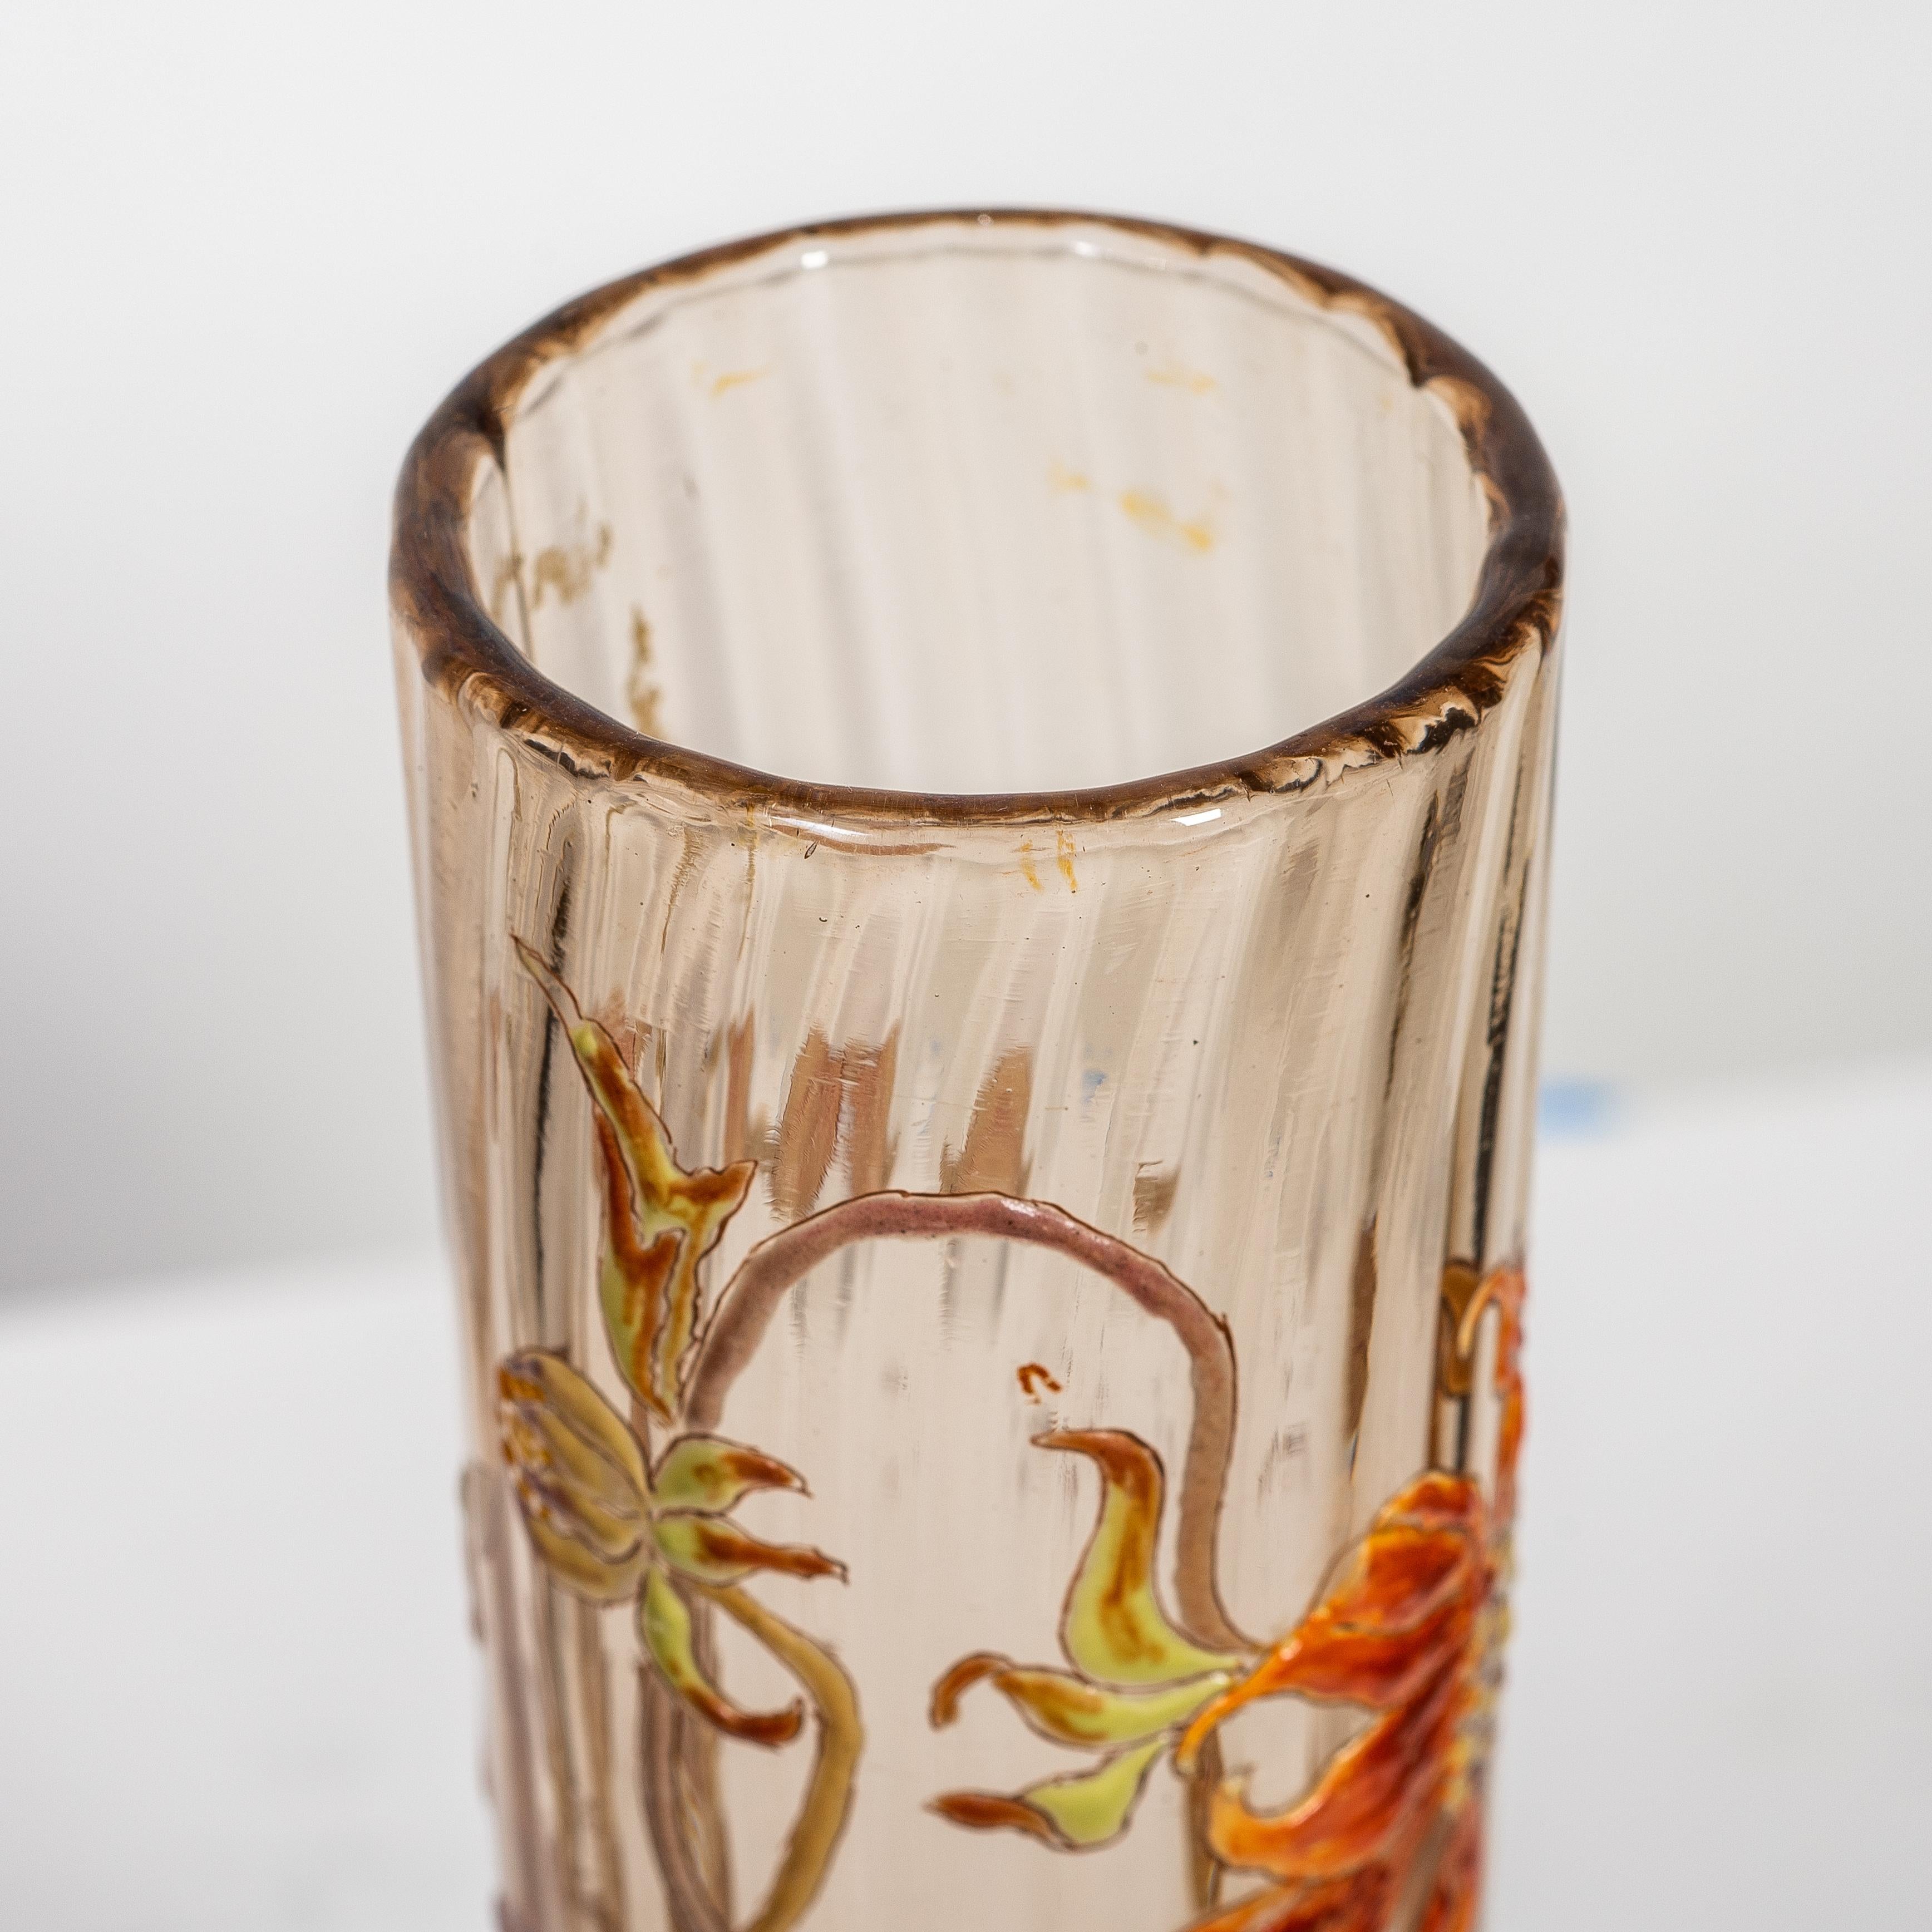 
Émile Gallé (1846-1904)
An Acid-Etched Enameled and applied Galle Glass Vase,
France, circa 1884-1889
etched mark and text 'Cristallerie de Gallé Nancy, modele et décor deposes', 
Width 3 in. (7.8 cm.) 
Height 7.67 in. (19.5 cm.)